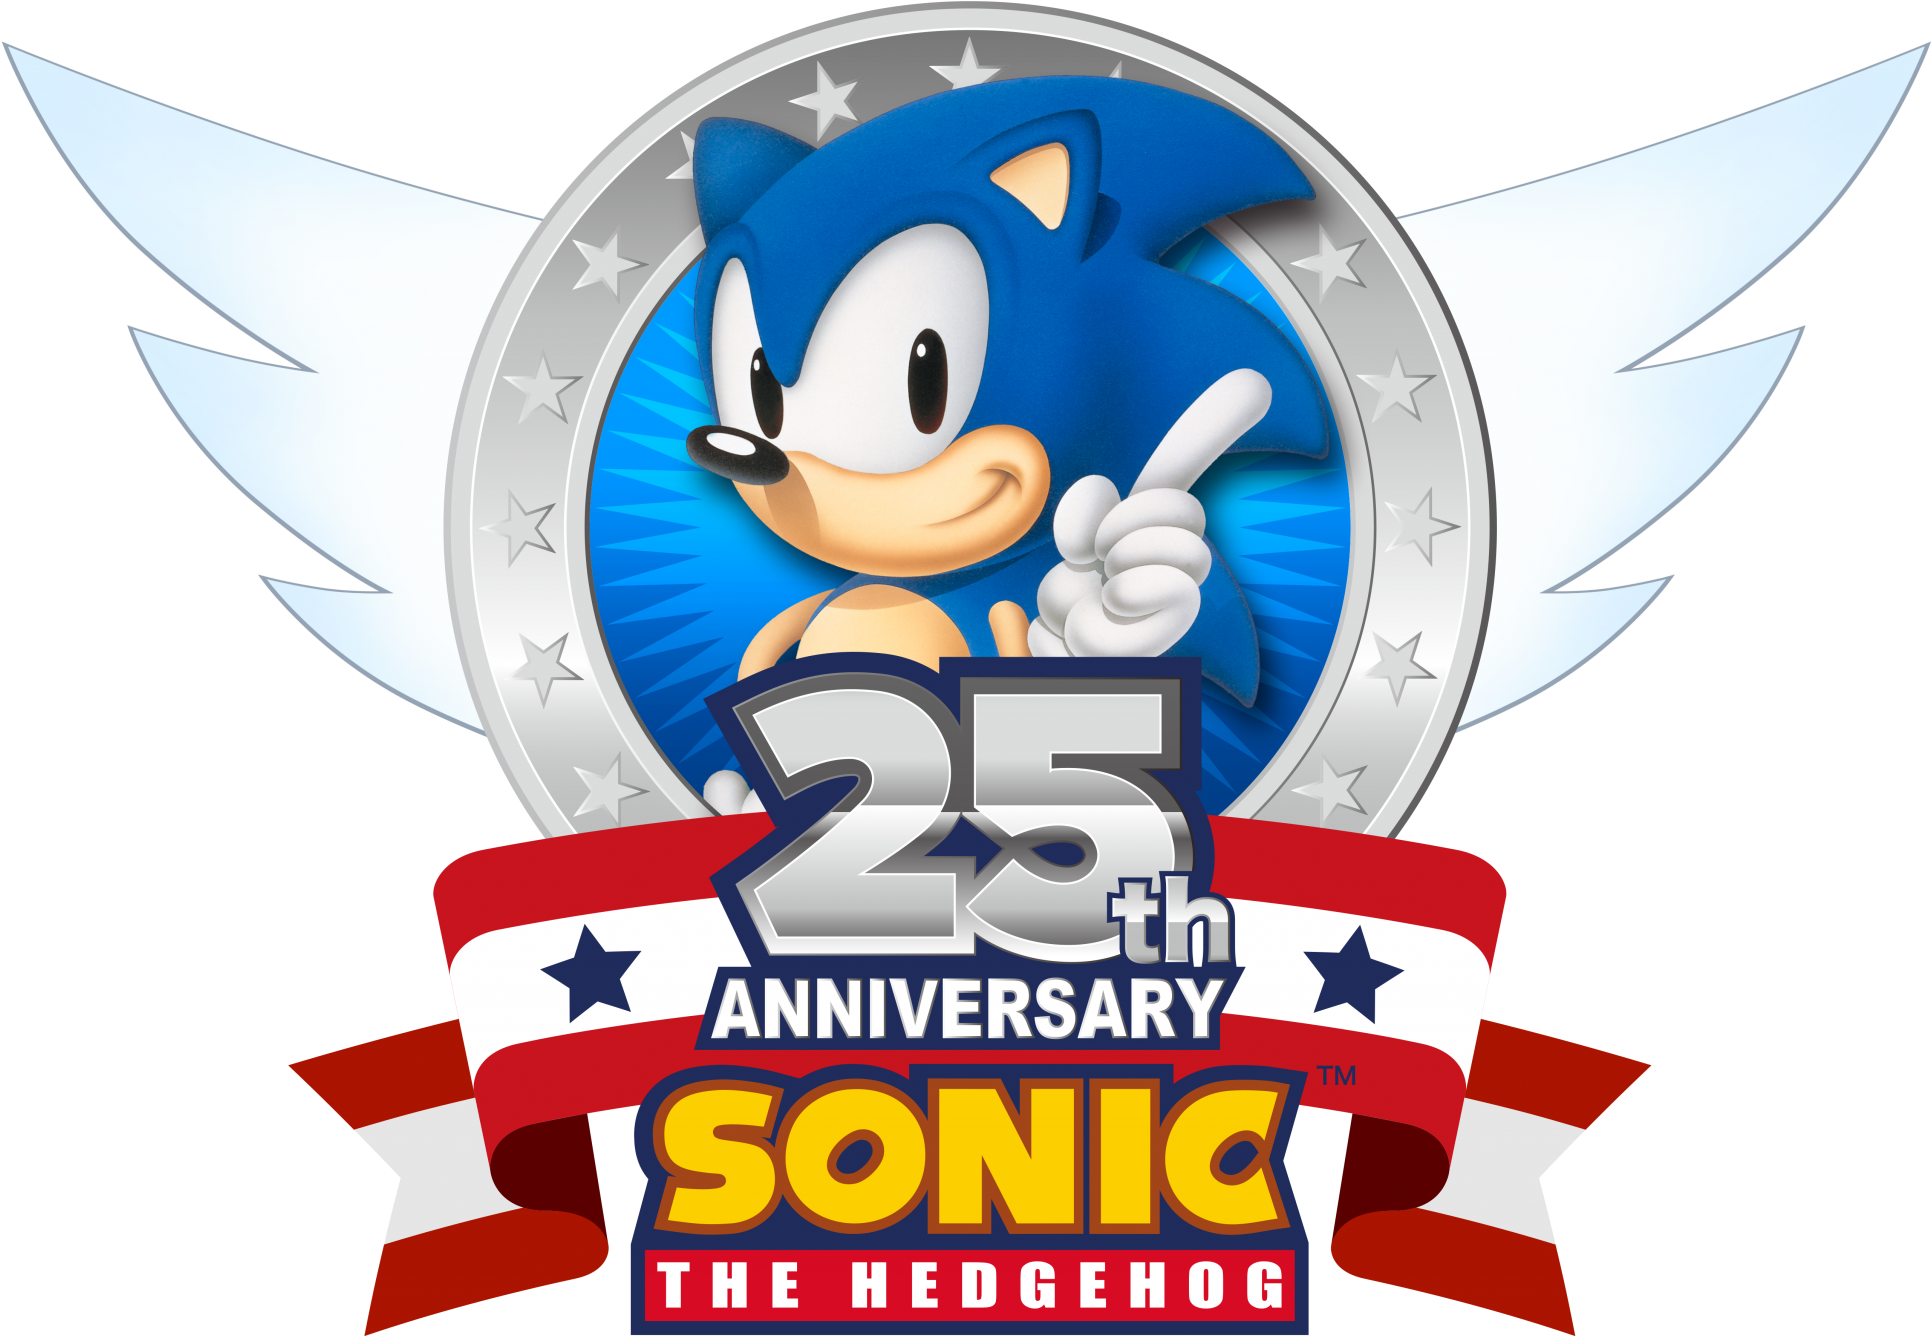 Sonic Gets Arty To Celebrate 25th Anniversary - Sonic 25th Anniversary Show (2048x1805)